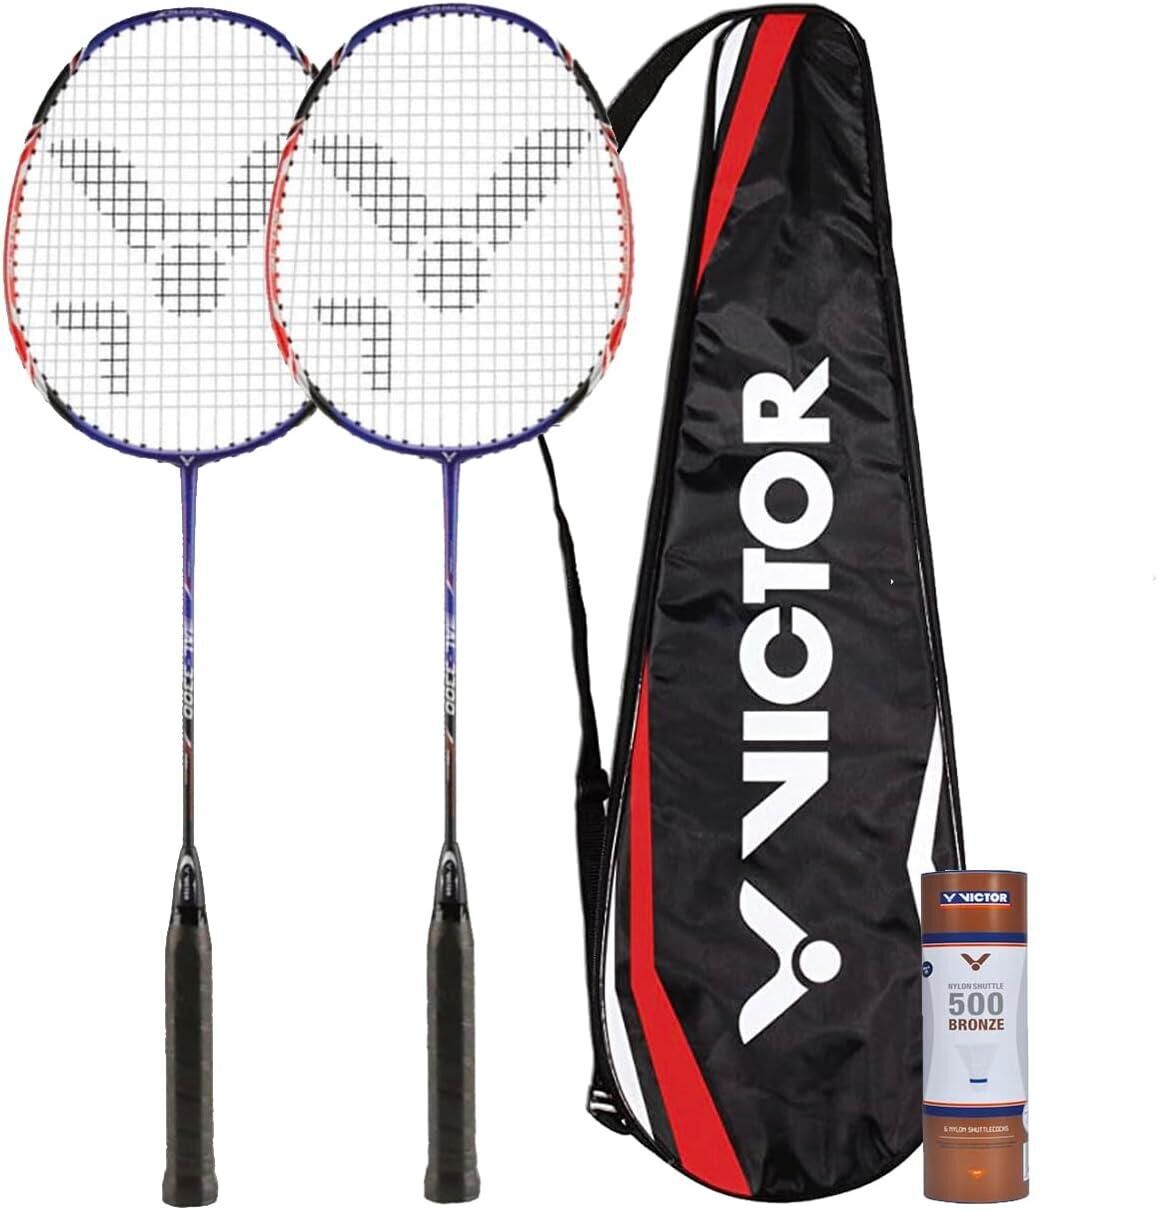 VICTOR Victor 3300 Badminton Twin Set, including Carry Case & 6 x Victor Shuttles